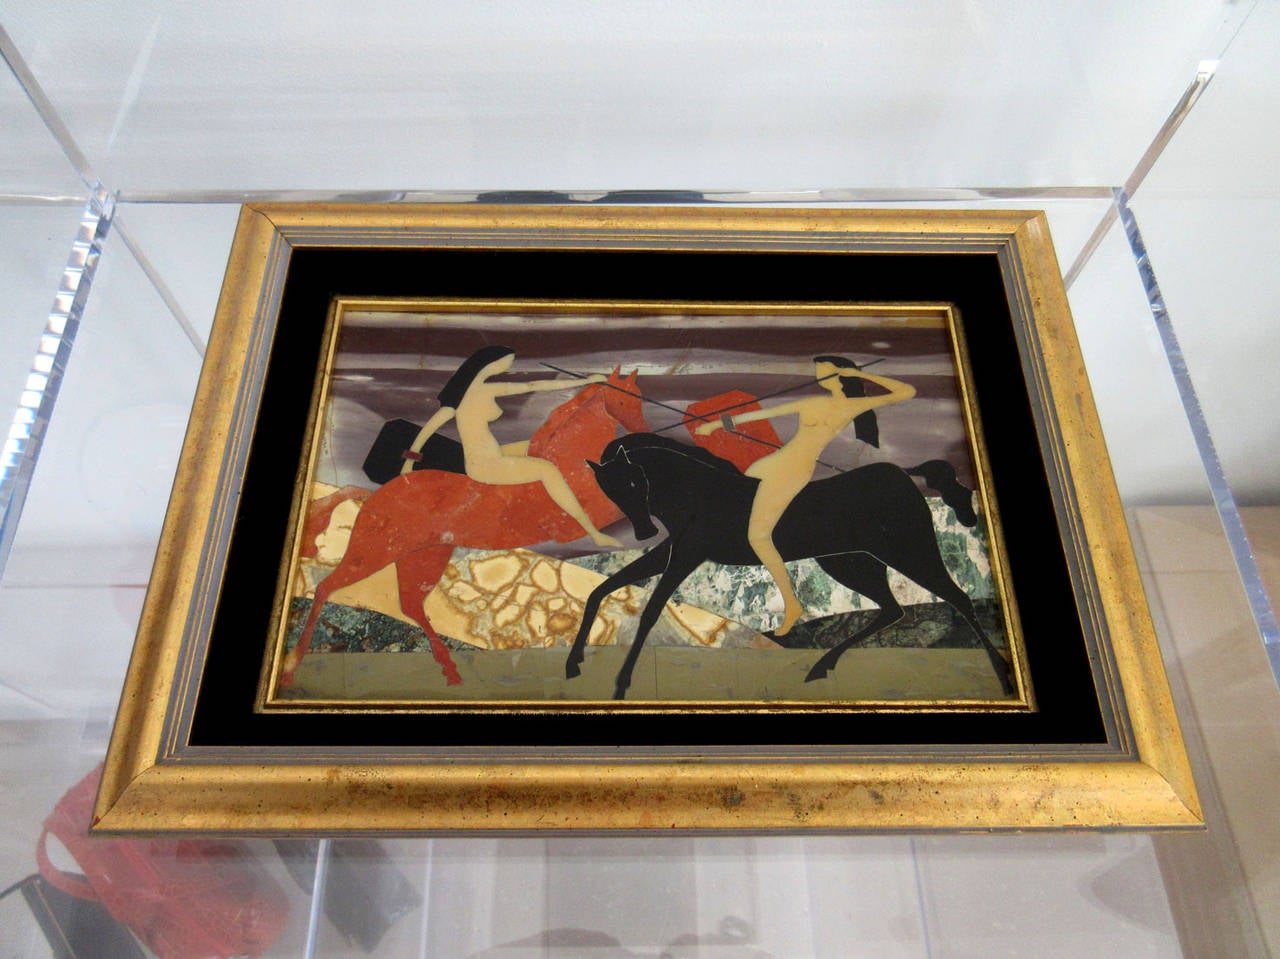 Vintage pietra dura framed plaque depicting two female nudes on horseback. Modernist in style the image is bold and framed in original gilt wood frame.